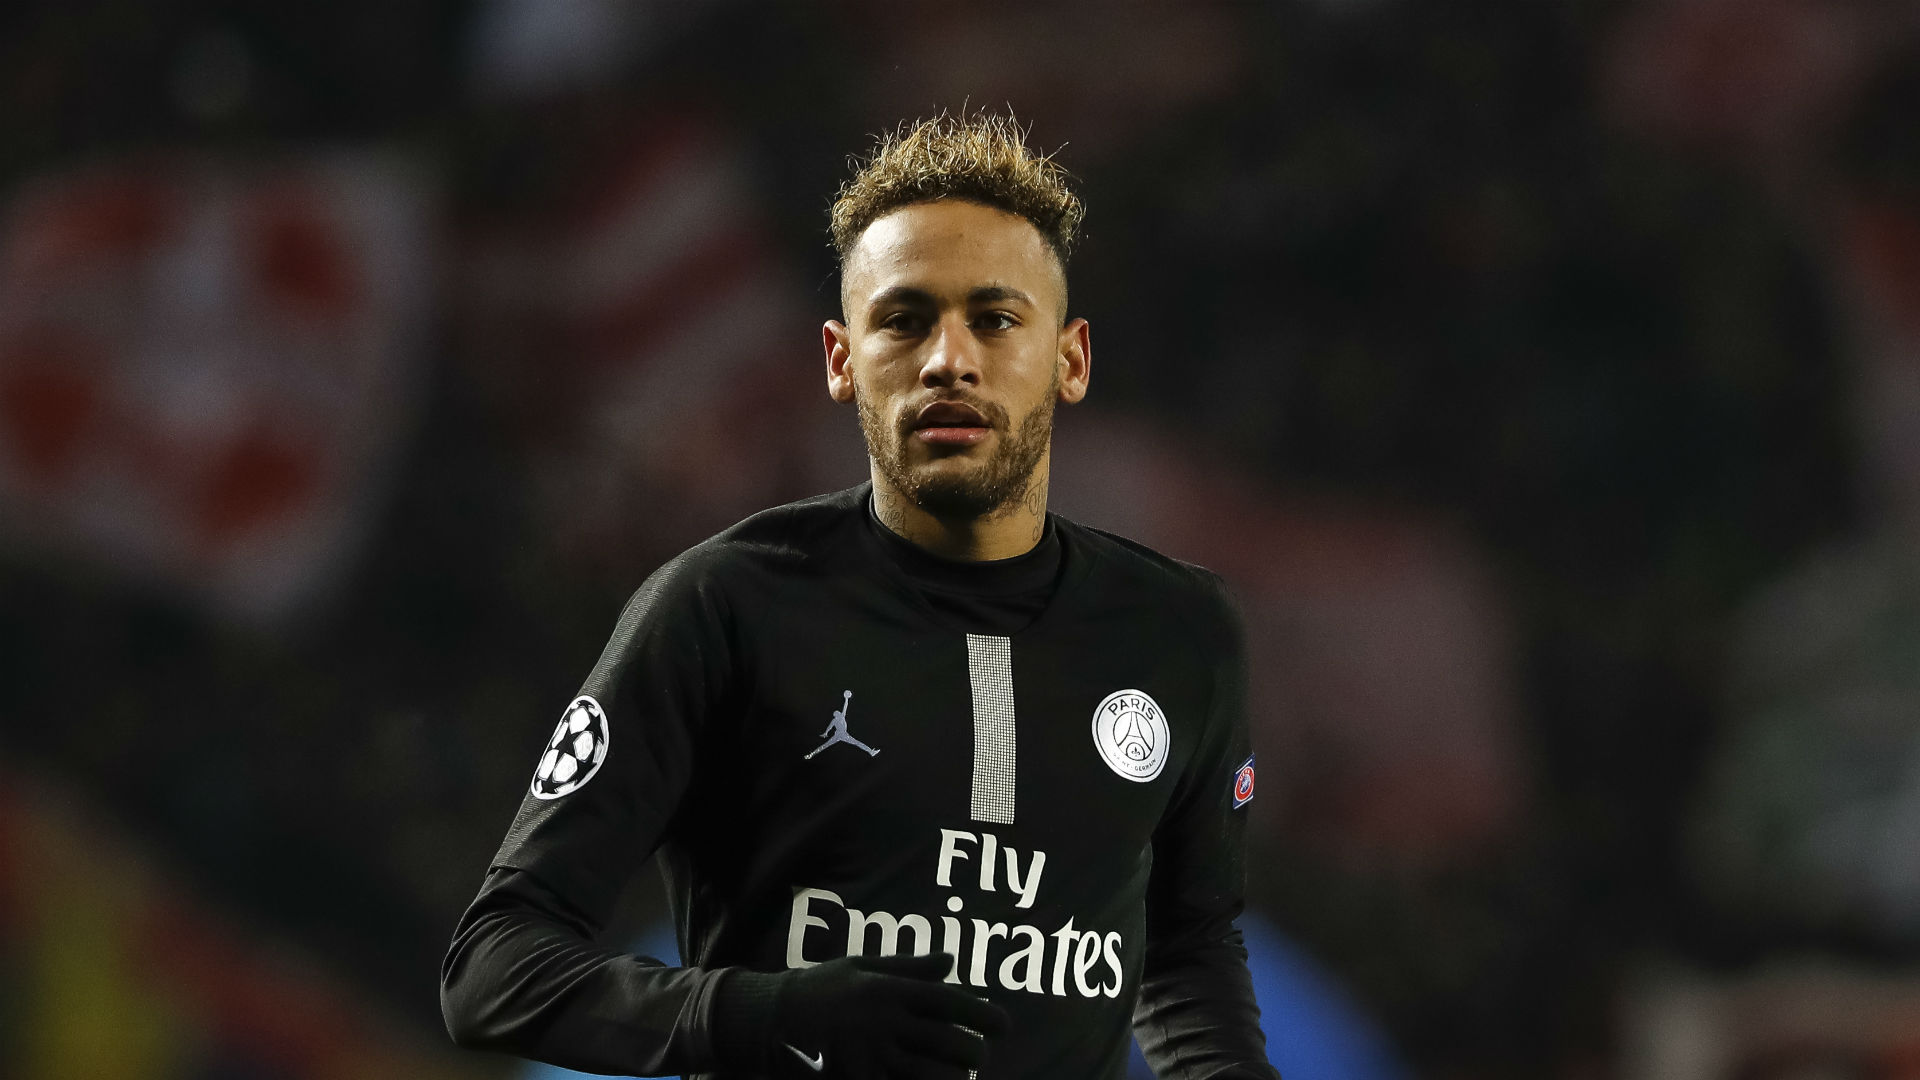 Cafu believes Paris Saint-Germain are capable of reaching the Champions League final without Neymar.